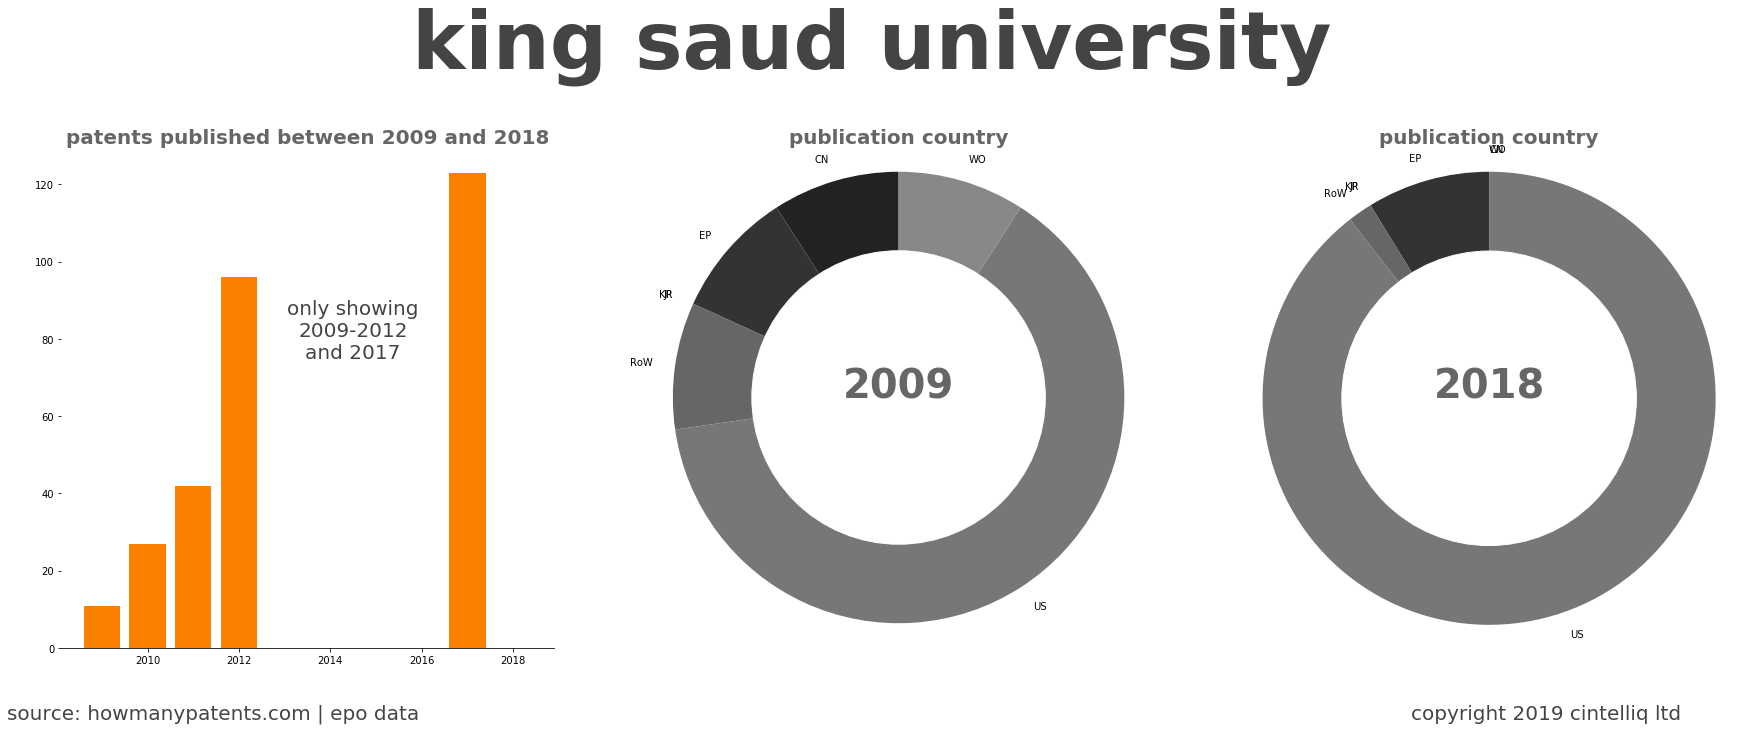 summary of patents for King Saud University